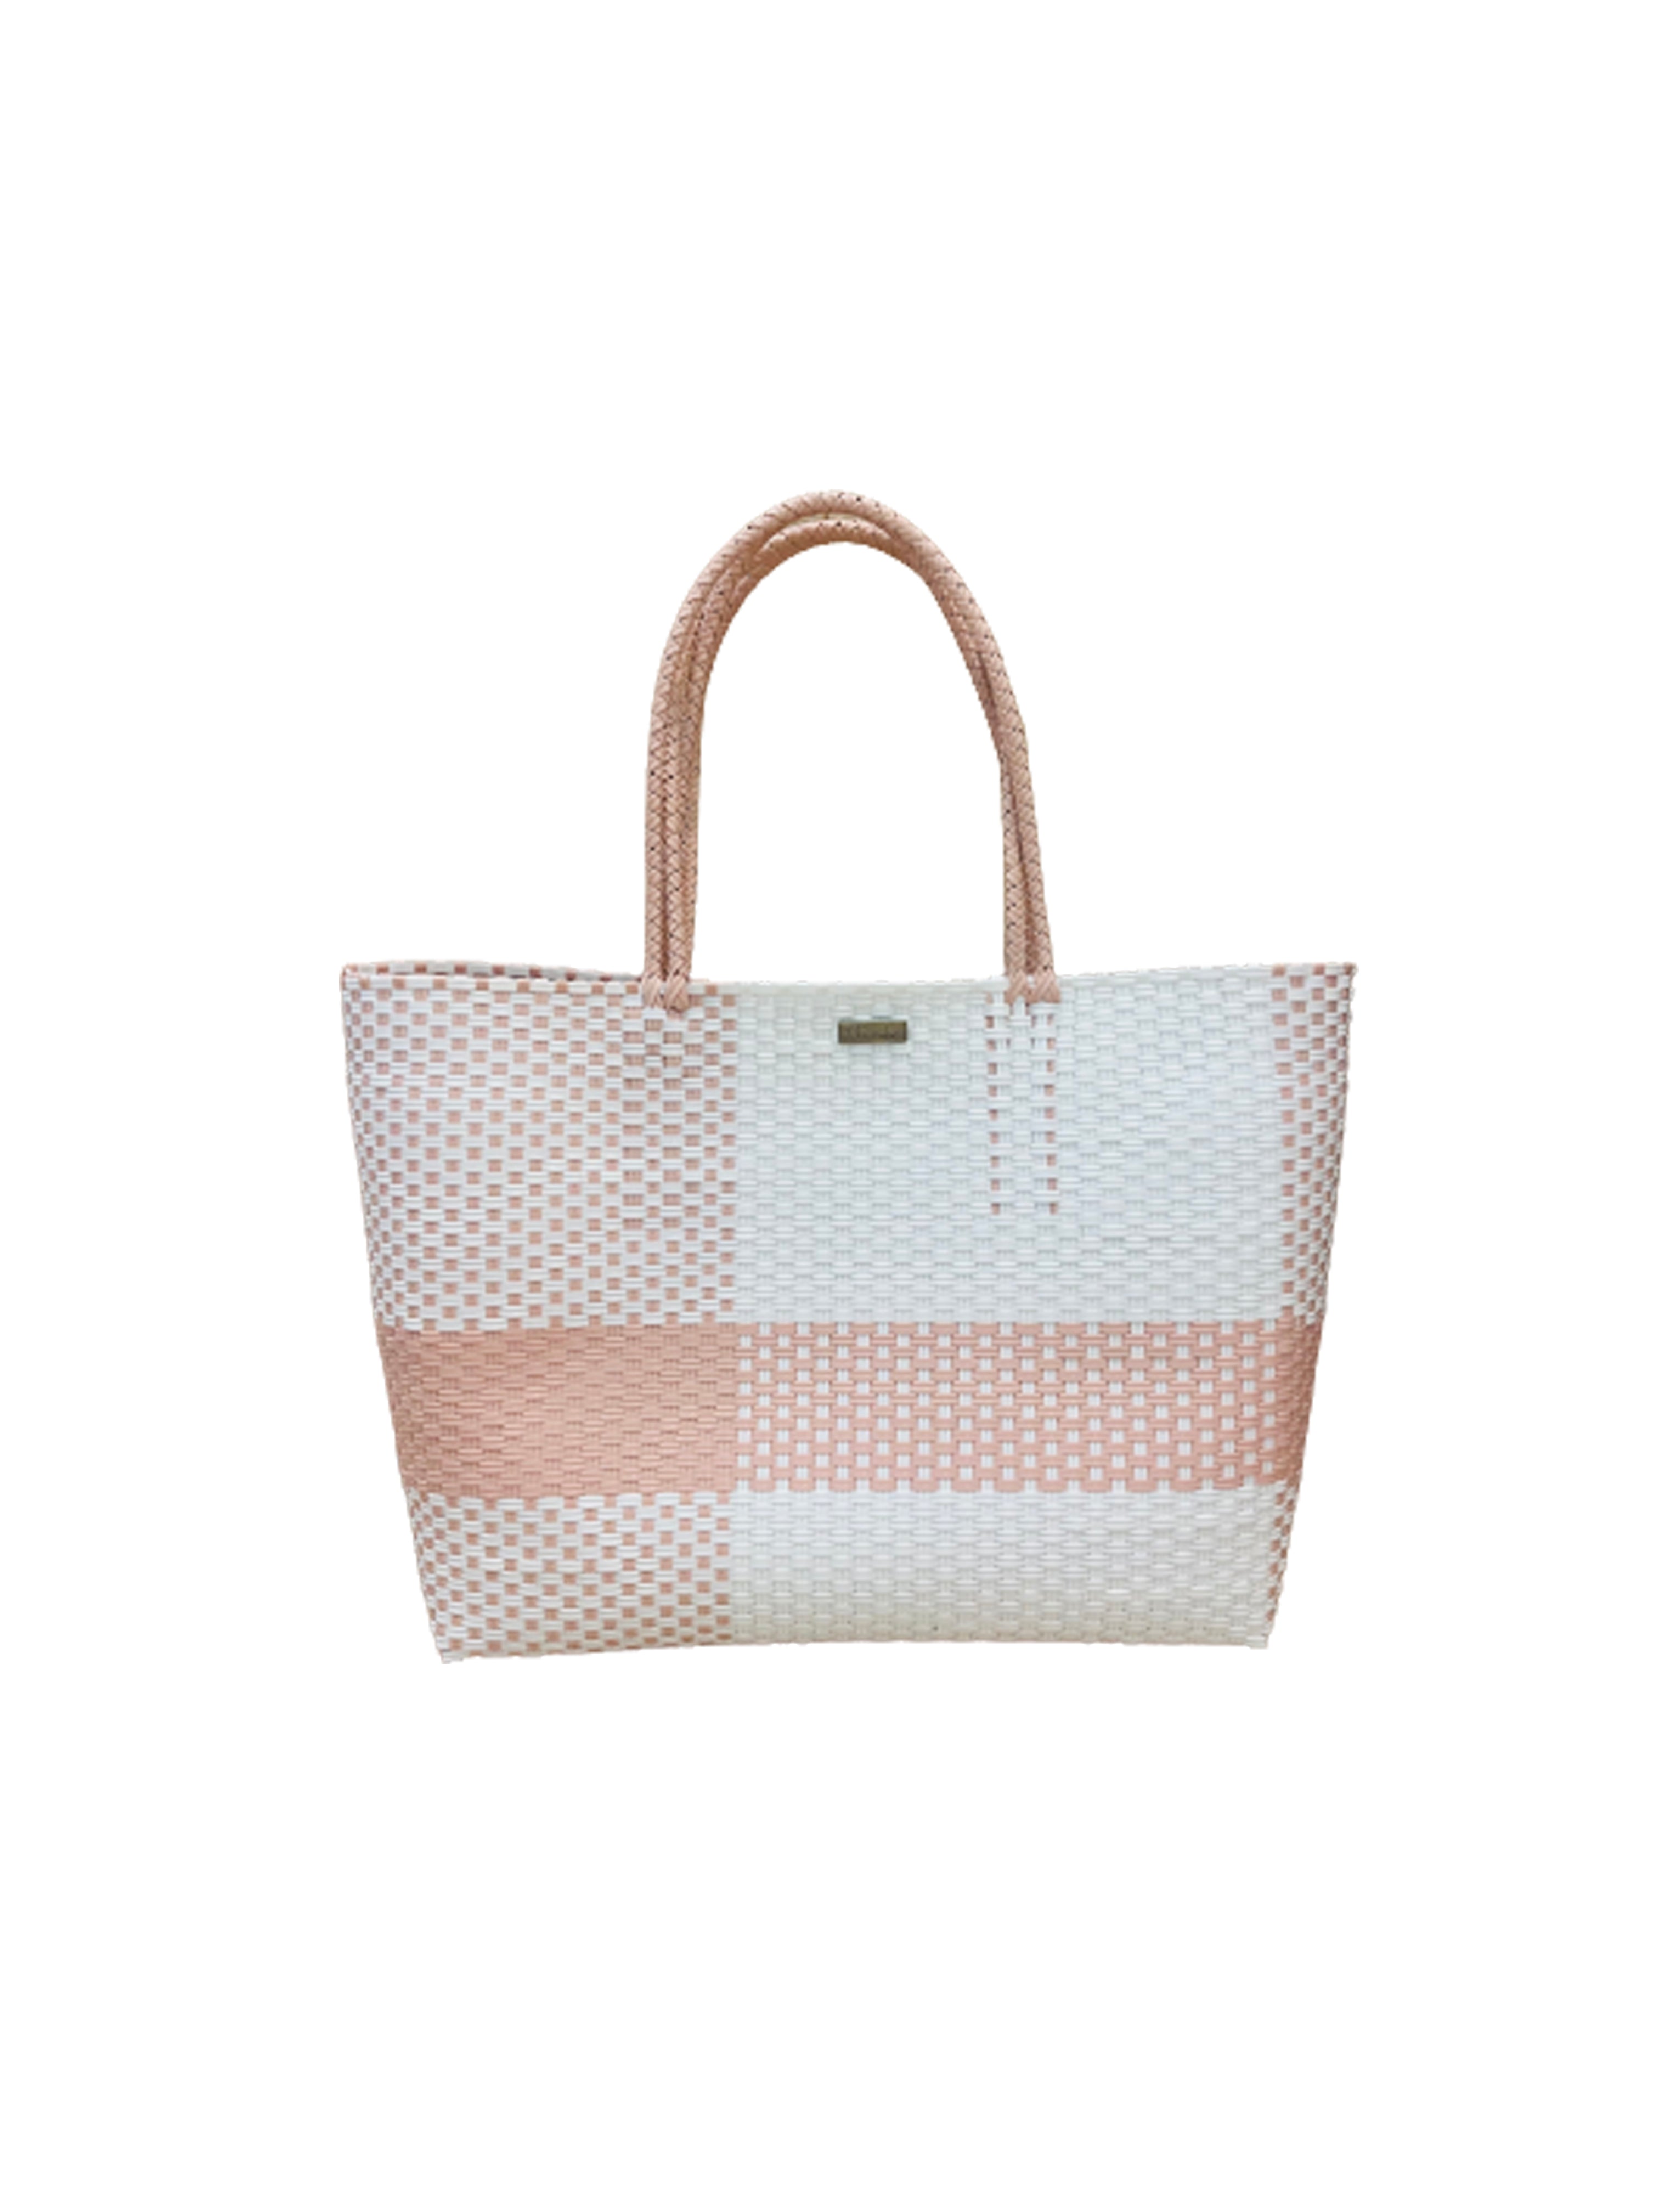 Playa Tote Pink + White / Large - 20 x 5.5 x 13 Inches